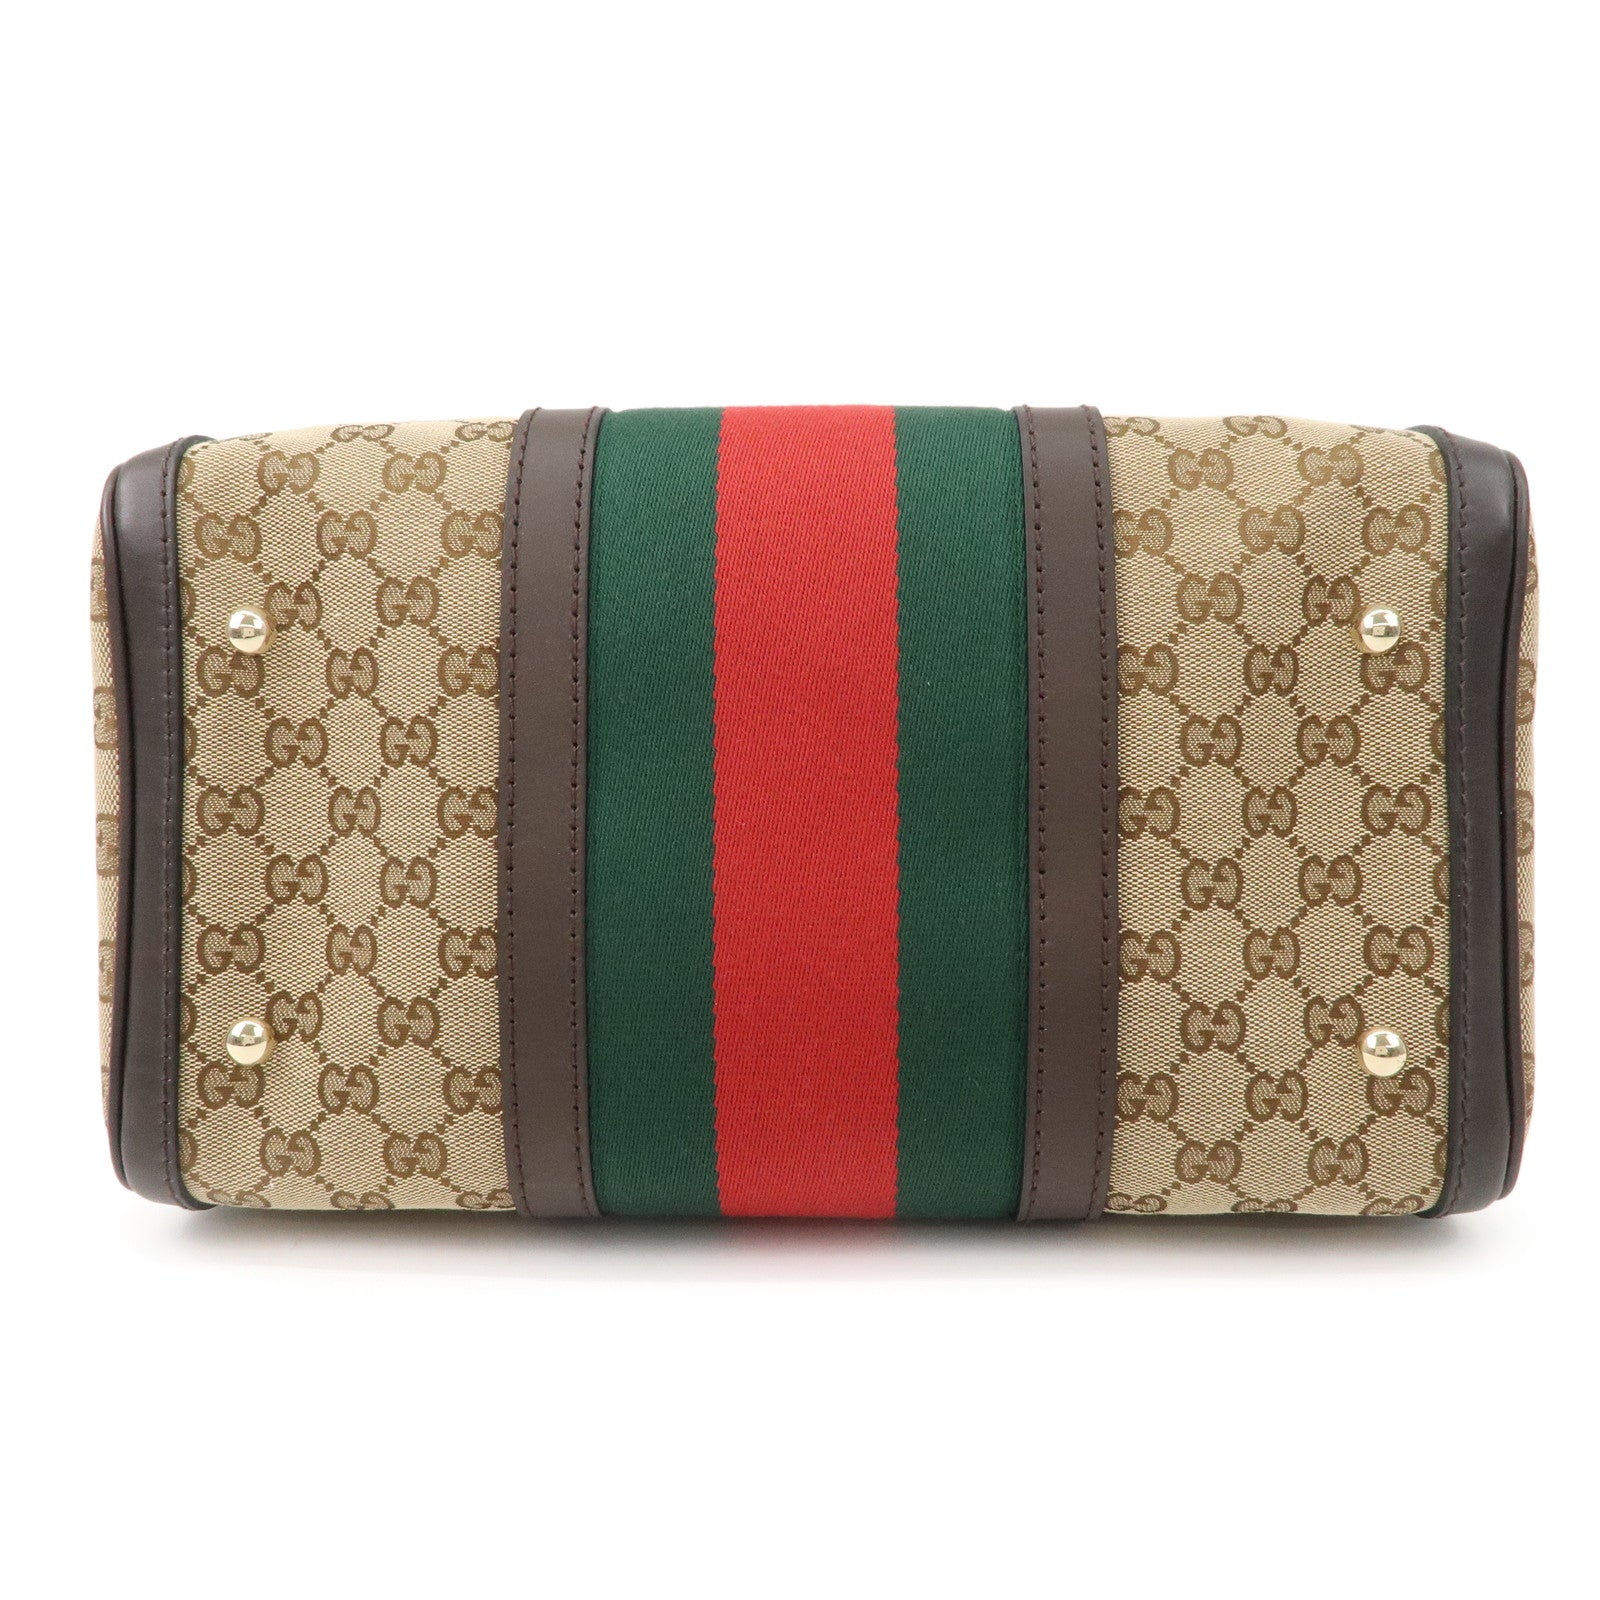 Shop GUCCI Unisex Canvas 2WAY Leather Crossbody Bag Small Shoulder Bag by  Smartlondon